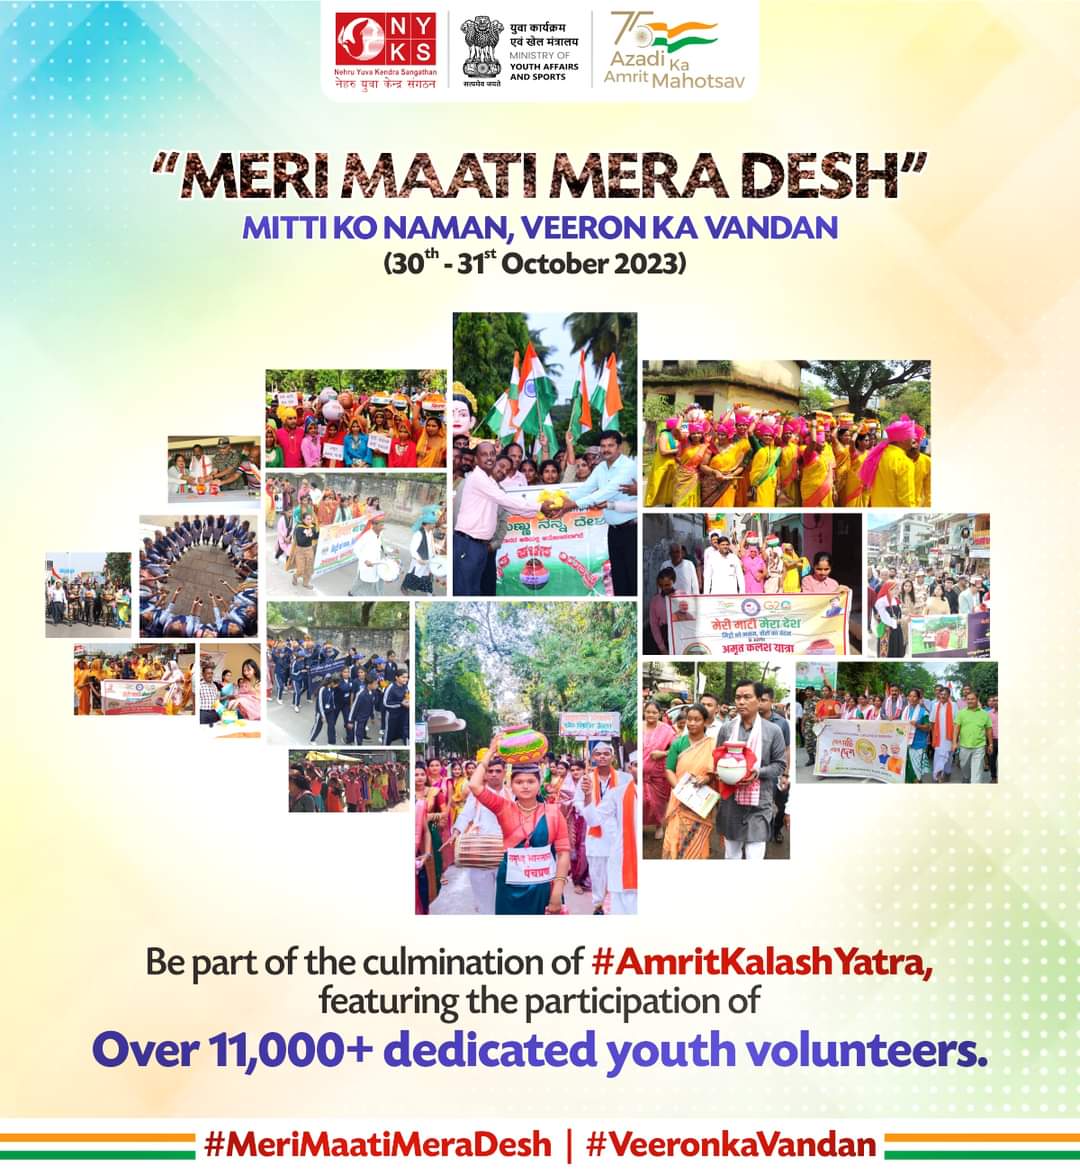 Every Kalash holds a distinct tale of our homeland's strength. Be part of the #MeriMaatiMeraDesh movement to witness the #AmritKalashYatra with 11,000+ Youth Volunteers in Delhi.

#VeeronKaVandan #AmritVatika #NYKS